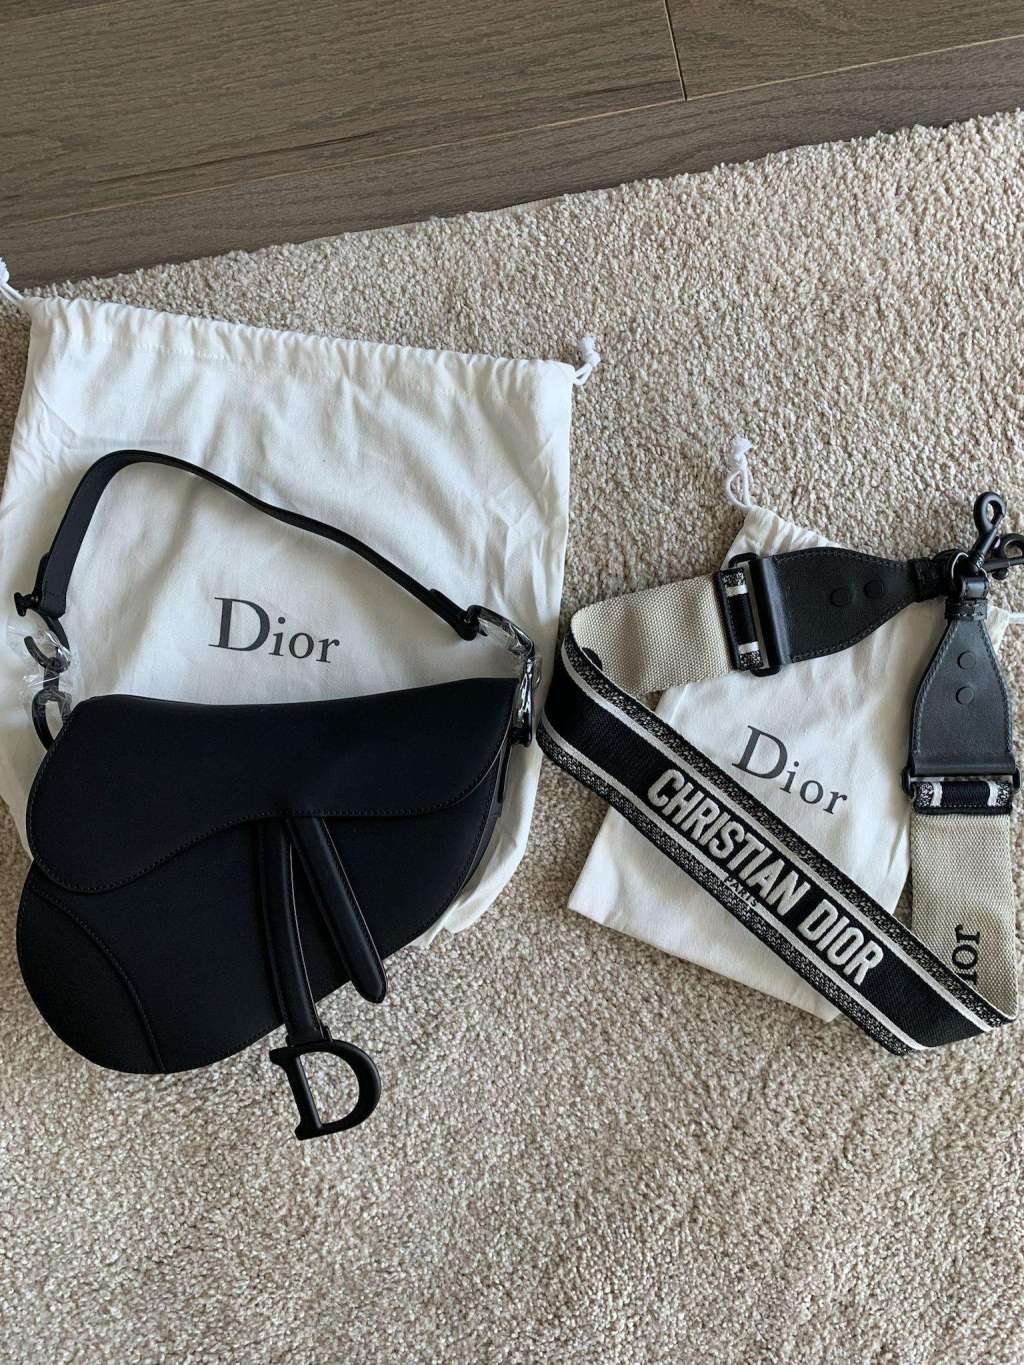 REVIEW] DIOR MEDIUM SADDLE IN ULTRA BLACK W/ GUITAR STRAP IN BHW FROM DMZ/THUMB FACTORY